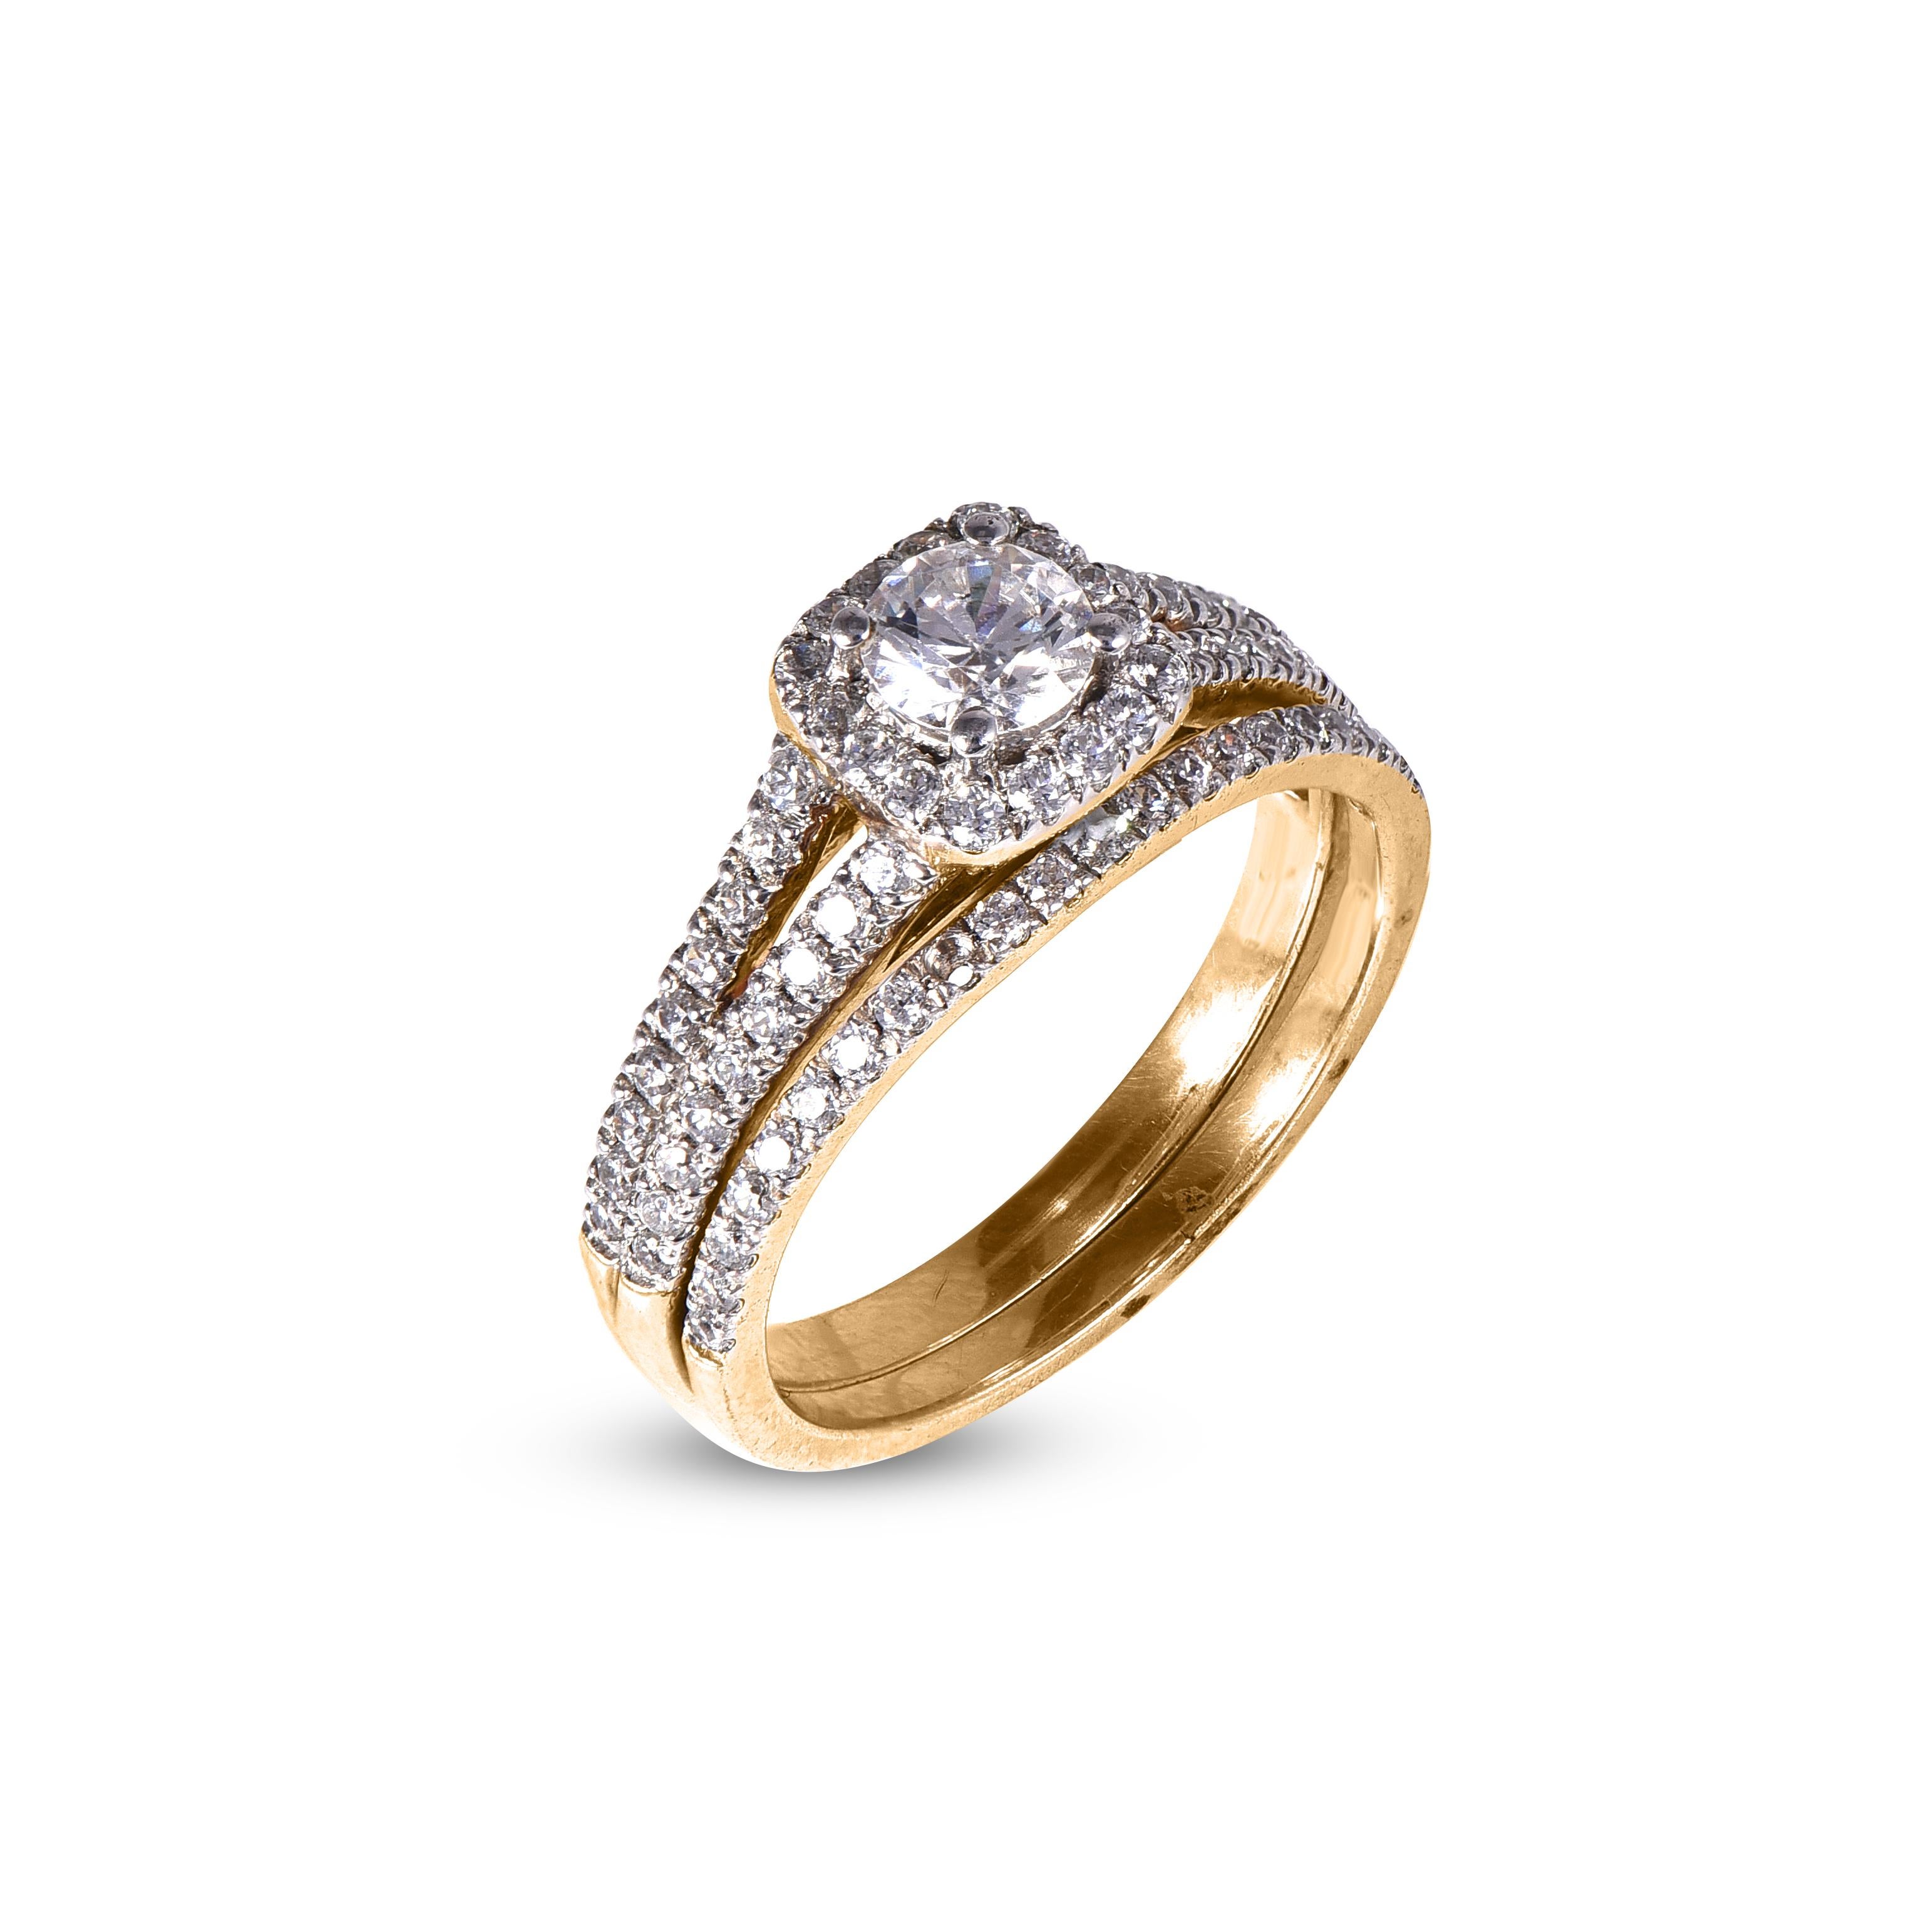 Exquisite 18 kt yellow gold bridal ring featuring 0.40 ct of centre stone and 0.60 ct on diamond frame and split shank engagement band. This ring is superbly detailed to perfection and set with 1.00 carat of sparkling brilliant cut round diamonds in